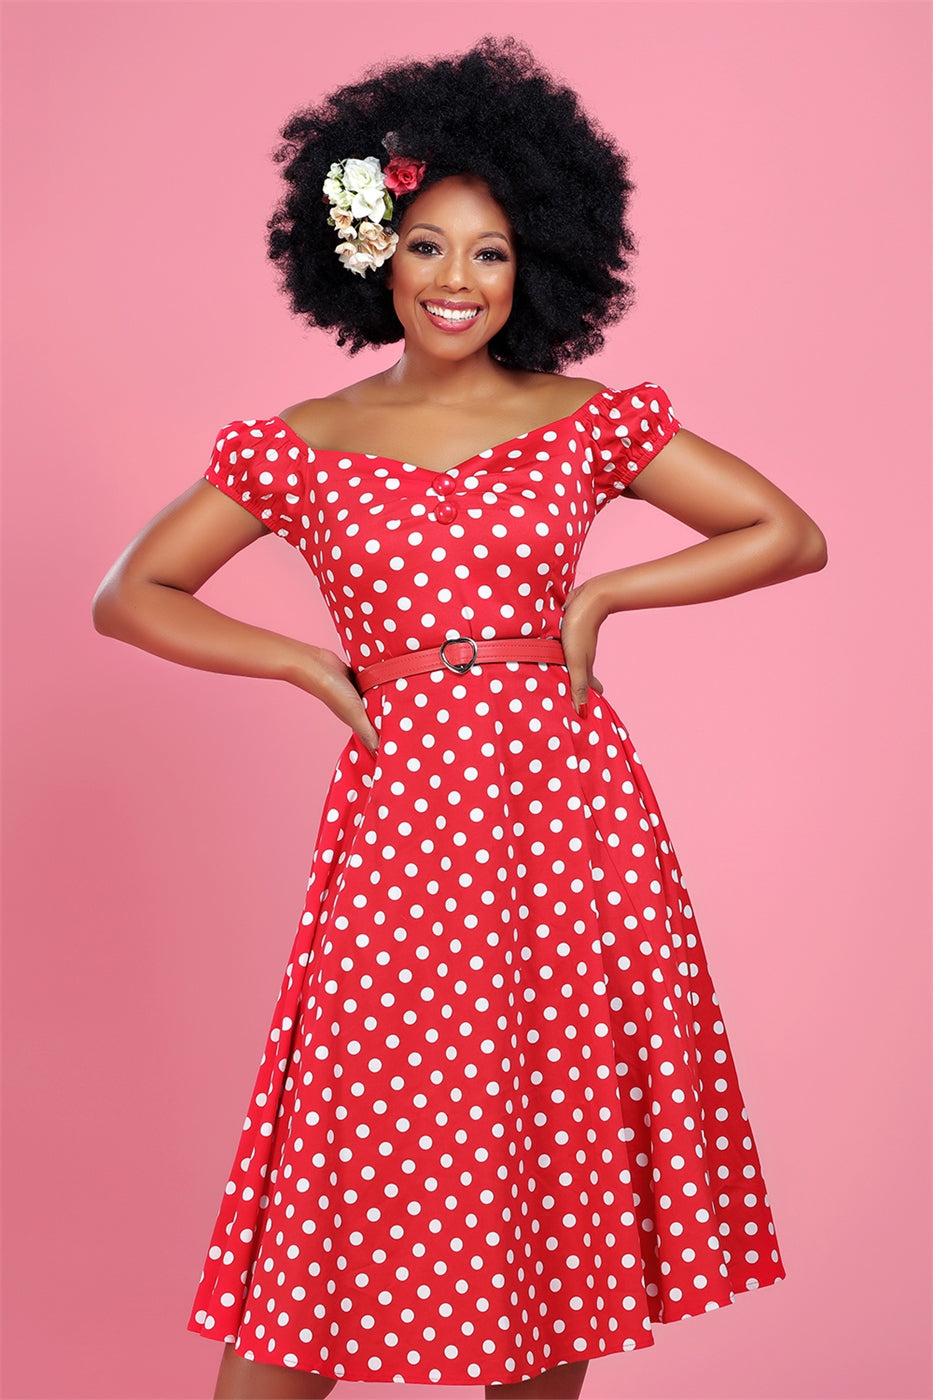 happy smiling girl wearing hair flowers in her hair and a red and white 50s style dress